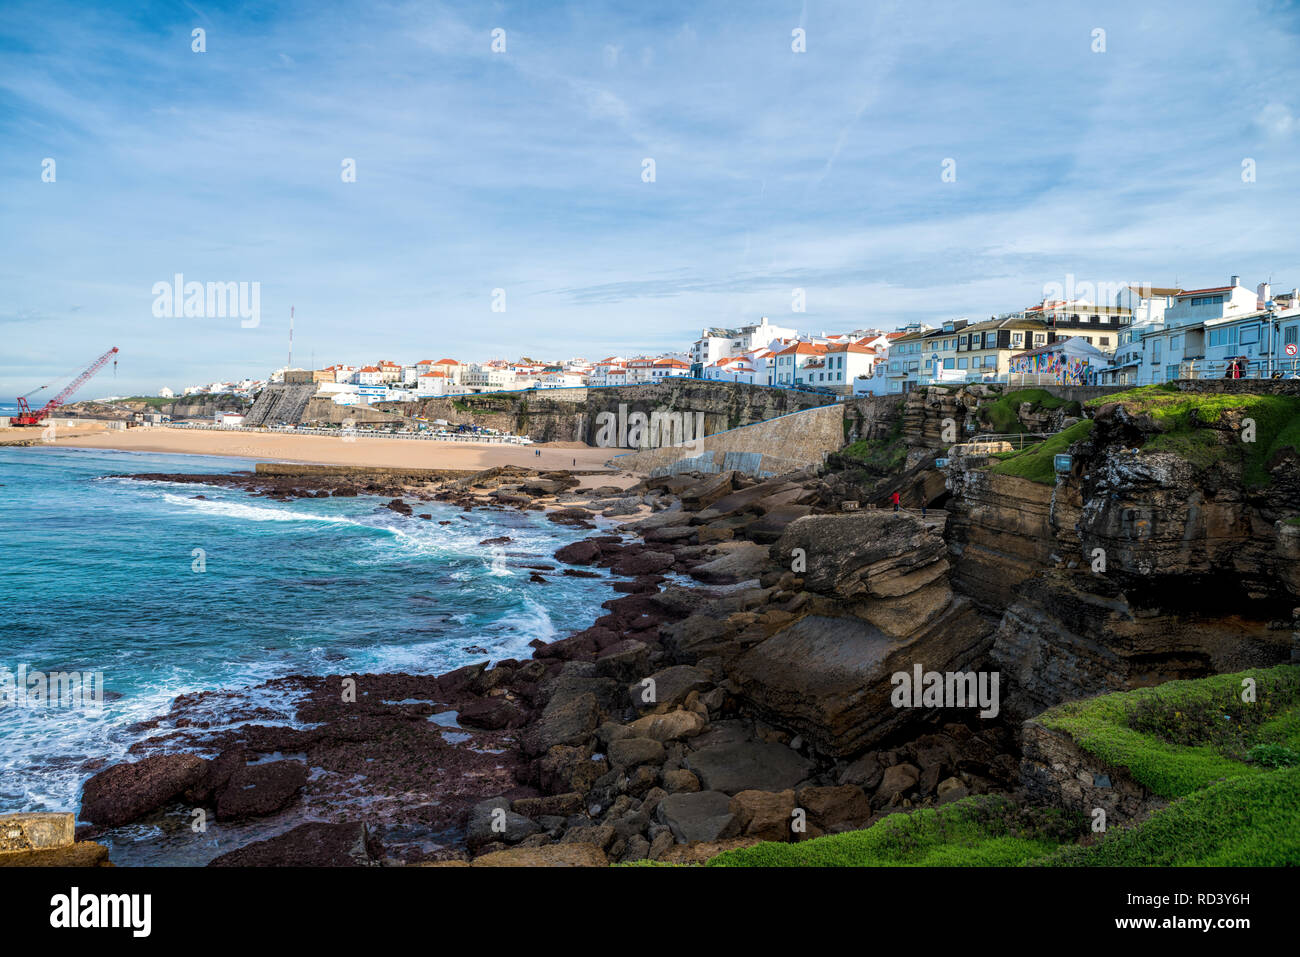 overthrow frequency stomach Houses and Coast of Ericeira Lisbon Region in Portugal Ericeira is a civil  parish and seaside resort/fishing community on the western coast of Portuga  Stock Photo - Alamy